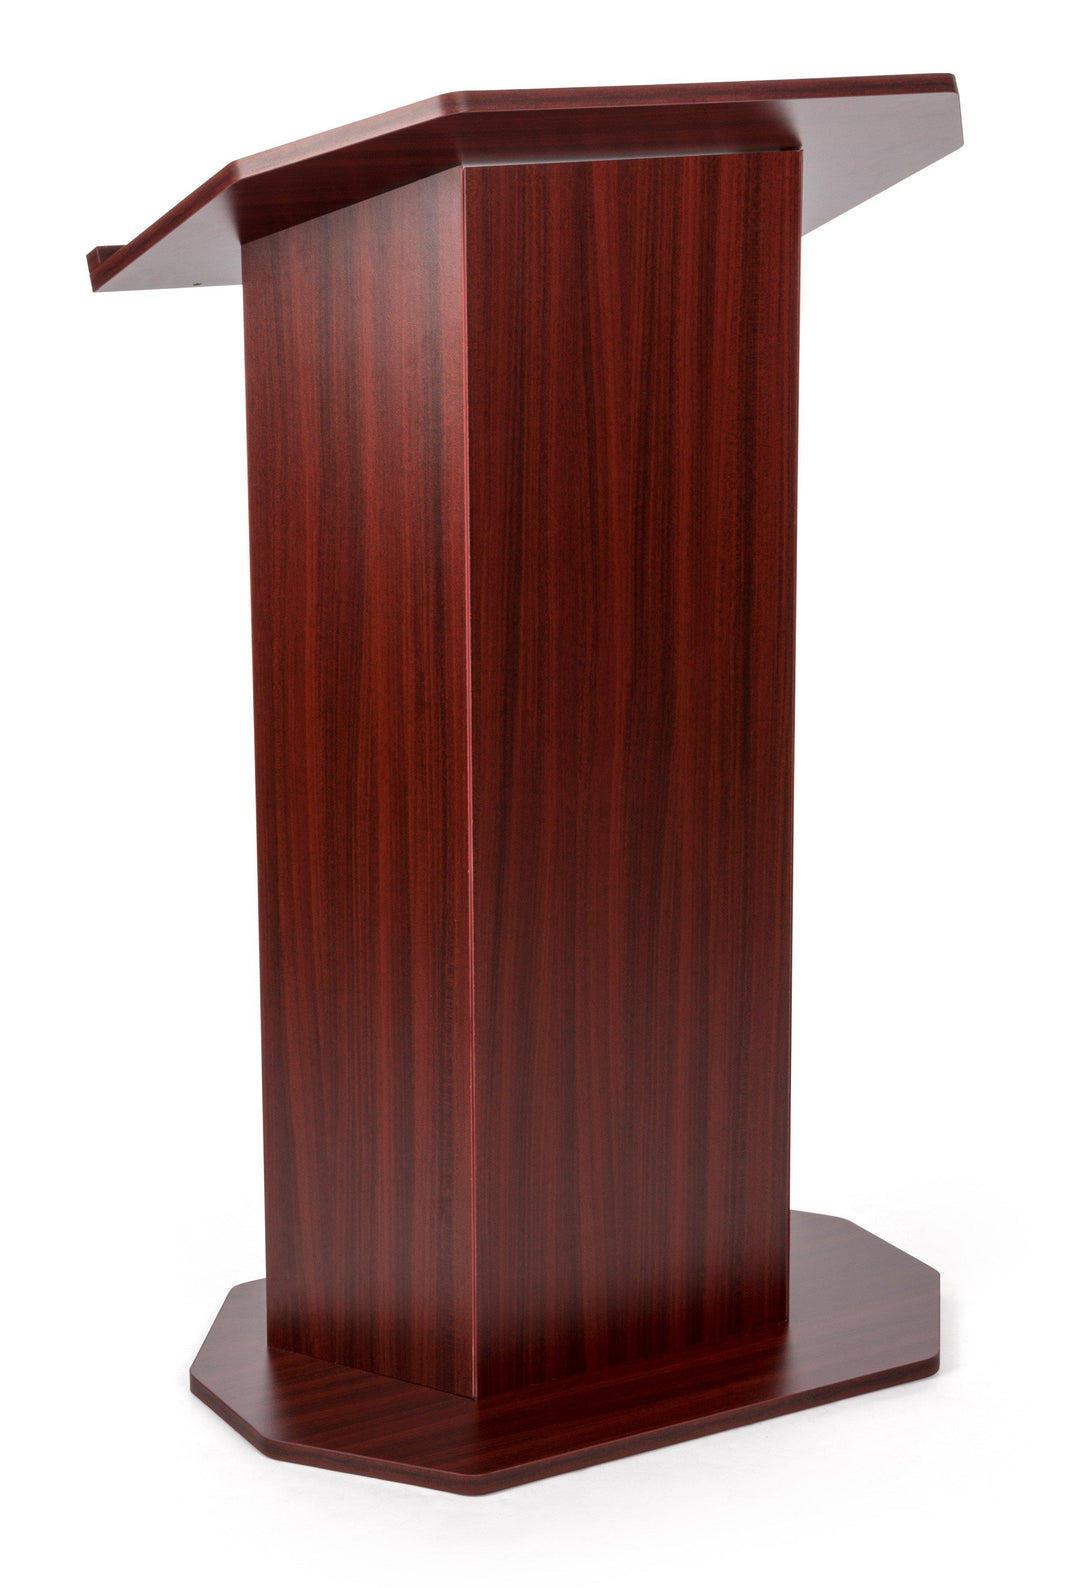 Portable Presentation Lectern Mobile With Open Back And Shelf. Color Mahogany-Portable Presentation Lecterns-Podiums Direct